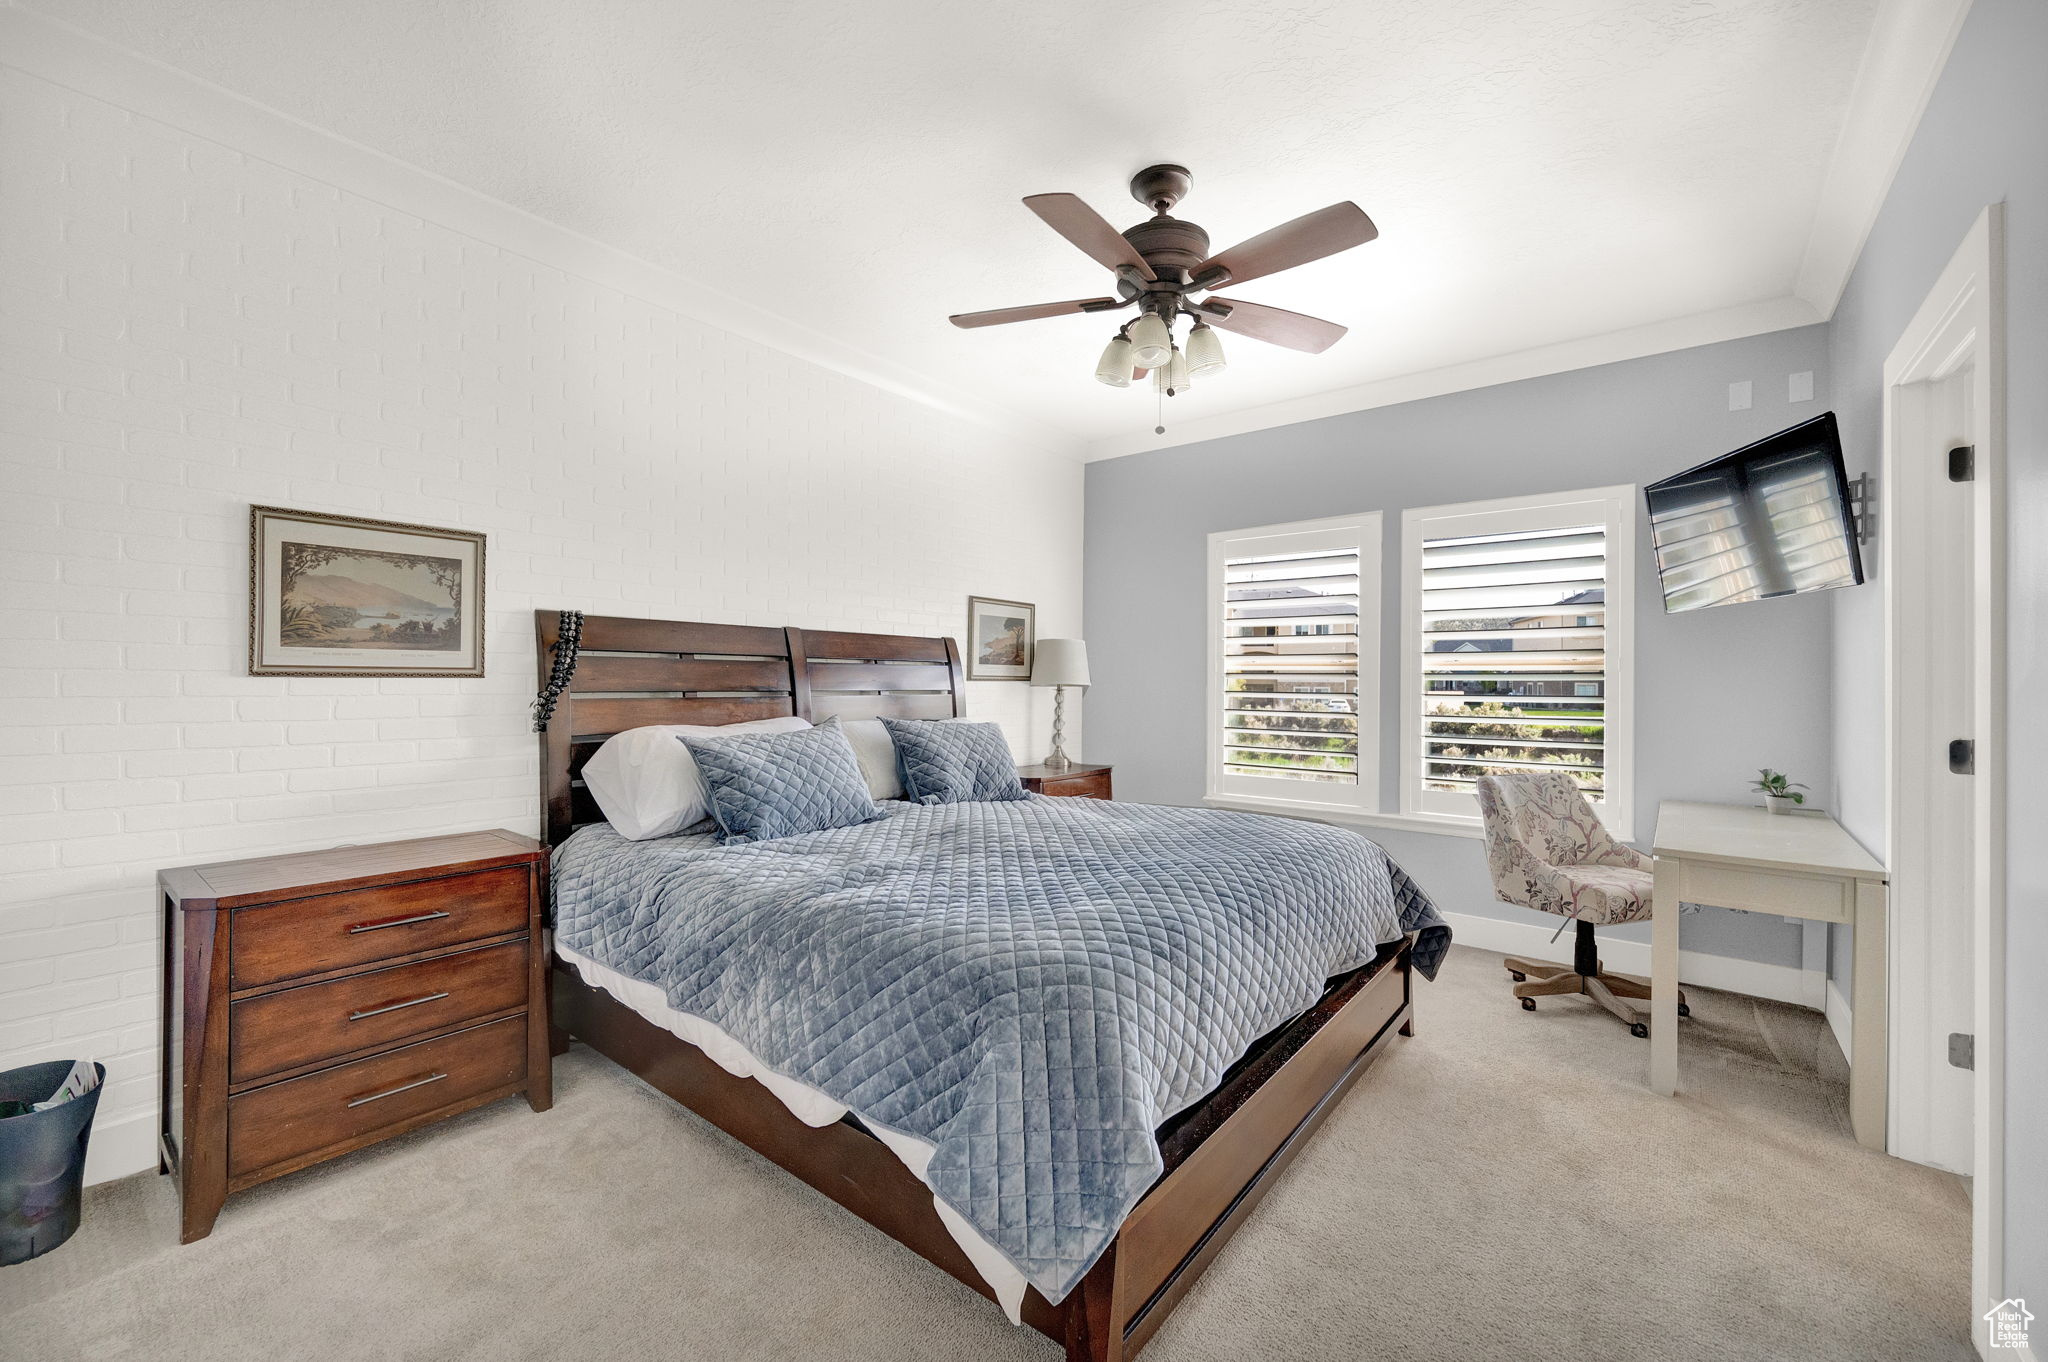 Bedroom with light colored carpet, ceiling fan, and ornamental molding